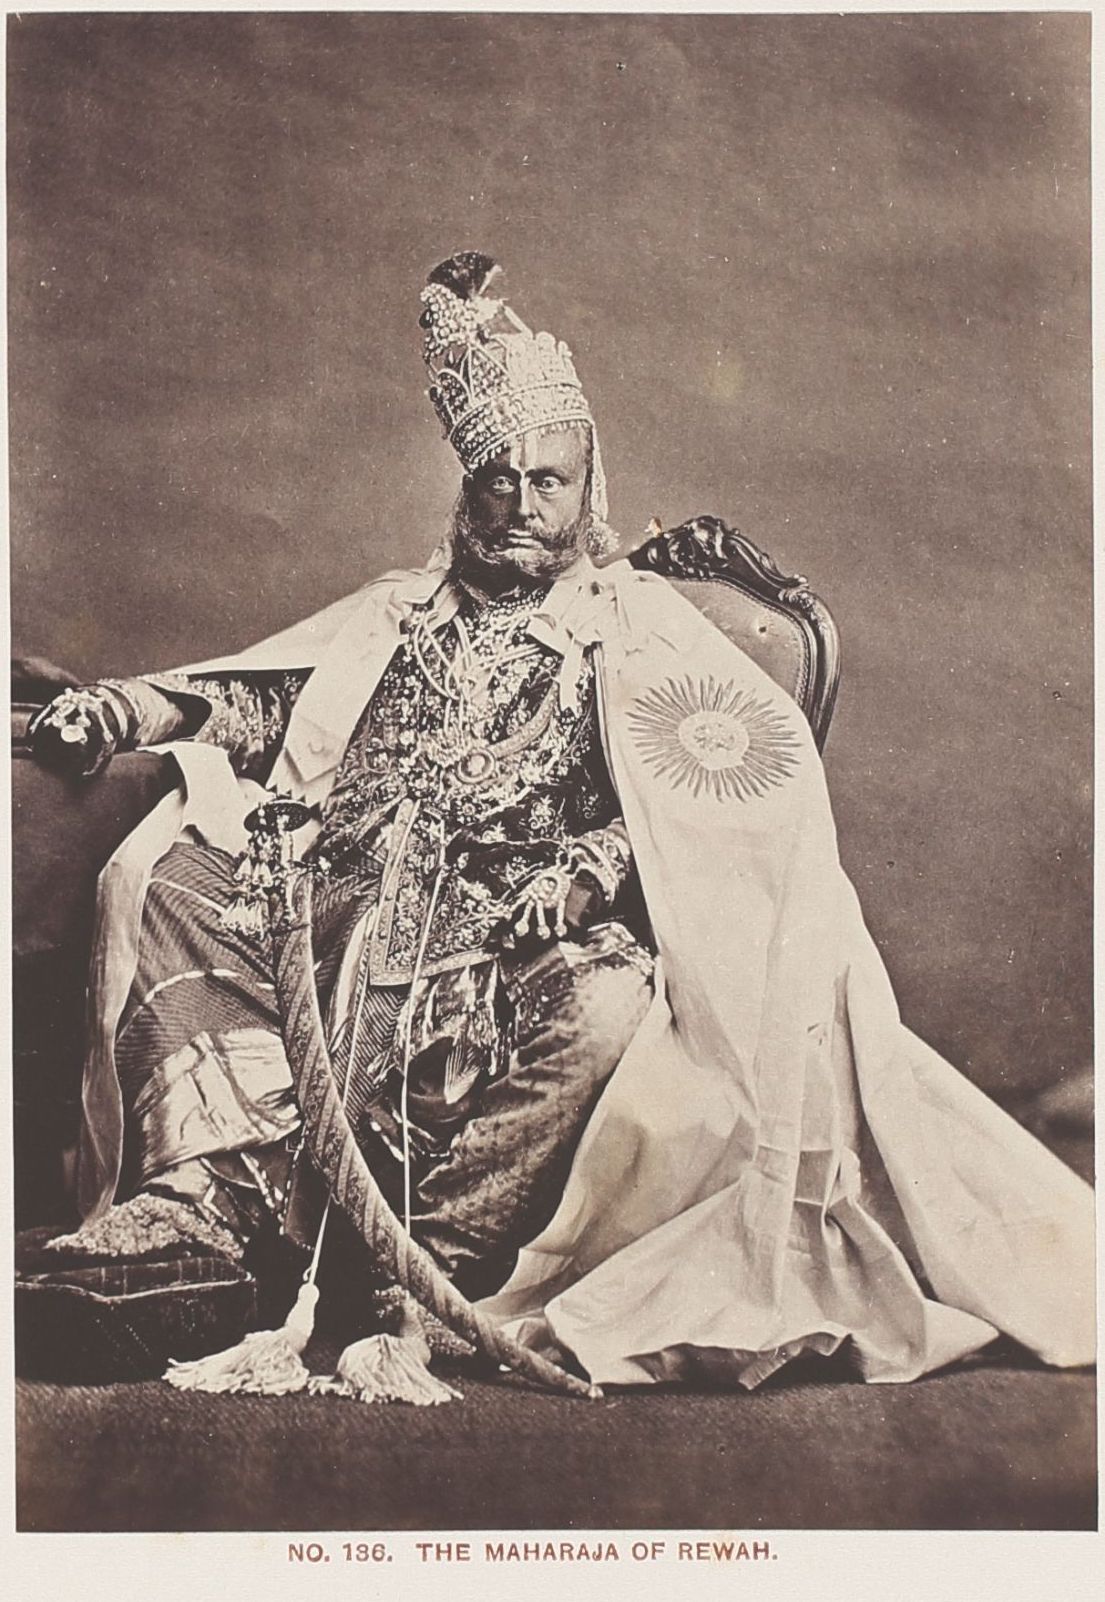 Object of the week: Behind-the-scenes of a royal Indian tour - 19th century India, Bourne and Shepherd, British India, featured, Indian Royalty, Object of the week, Open Roads, Prince of Wales, Travel